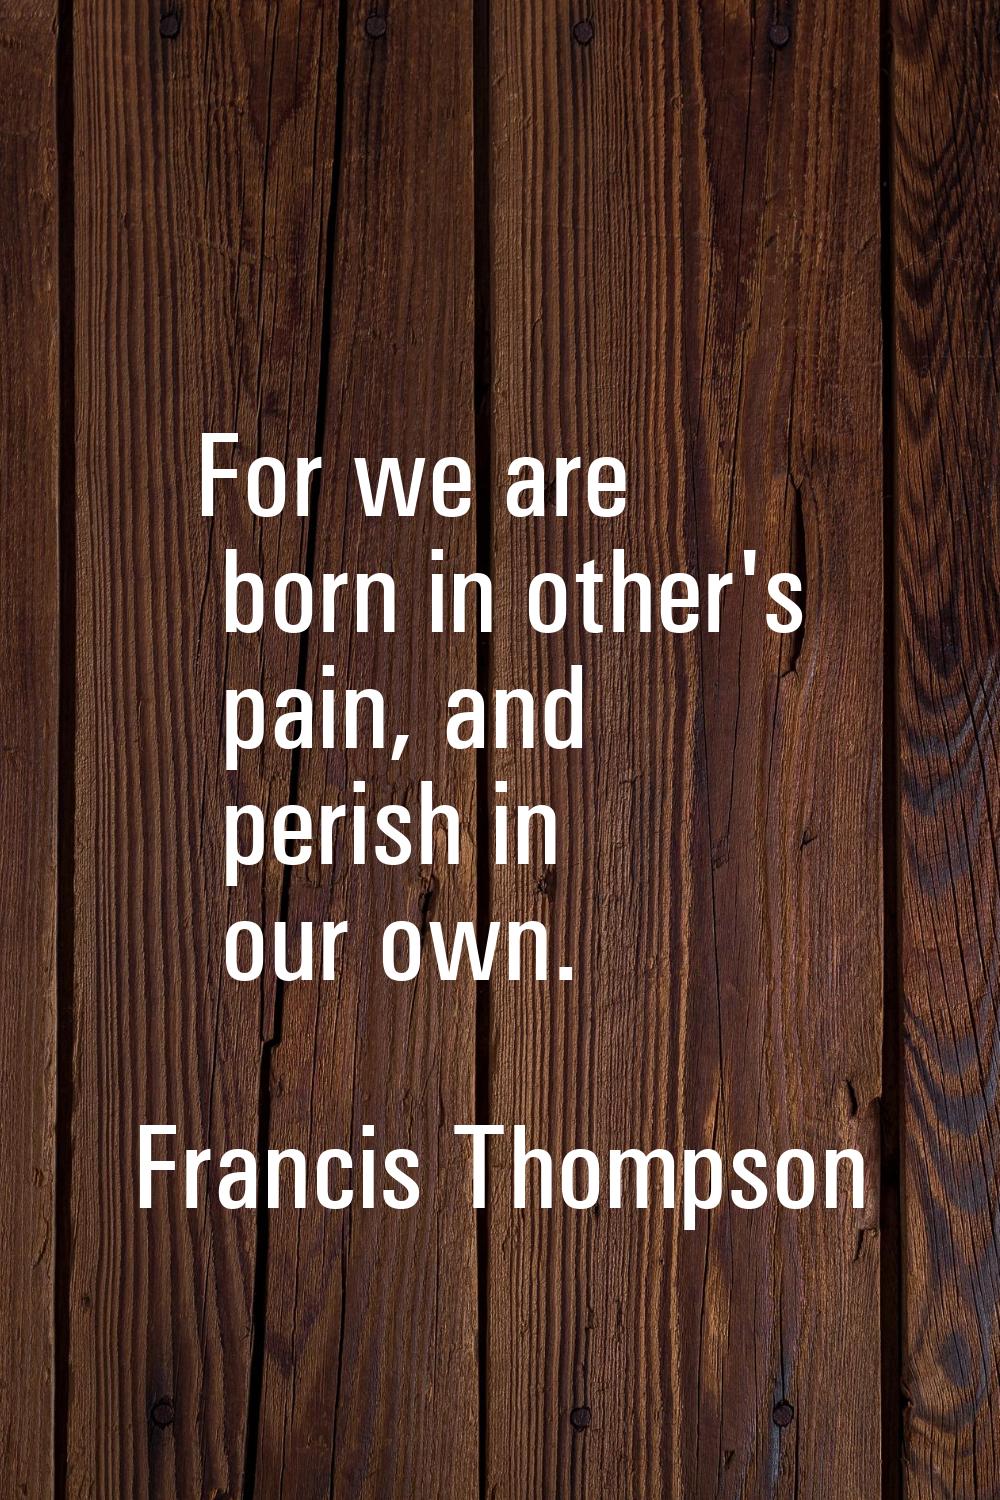 For we are born in other's pain, and perish in our own.